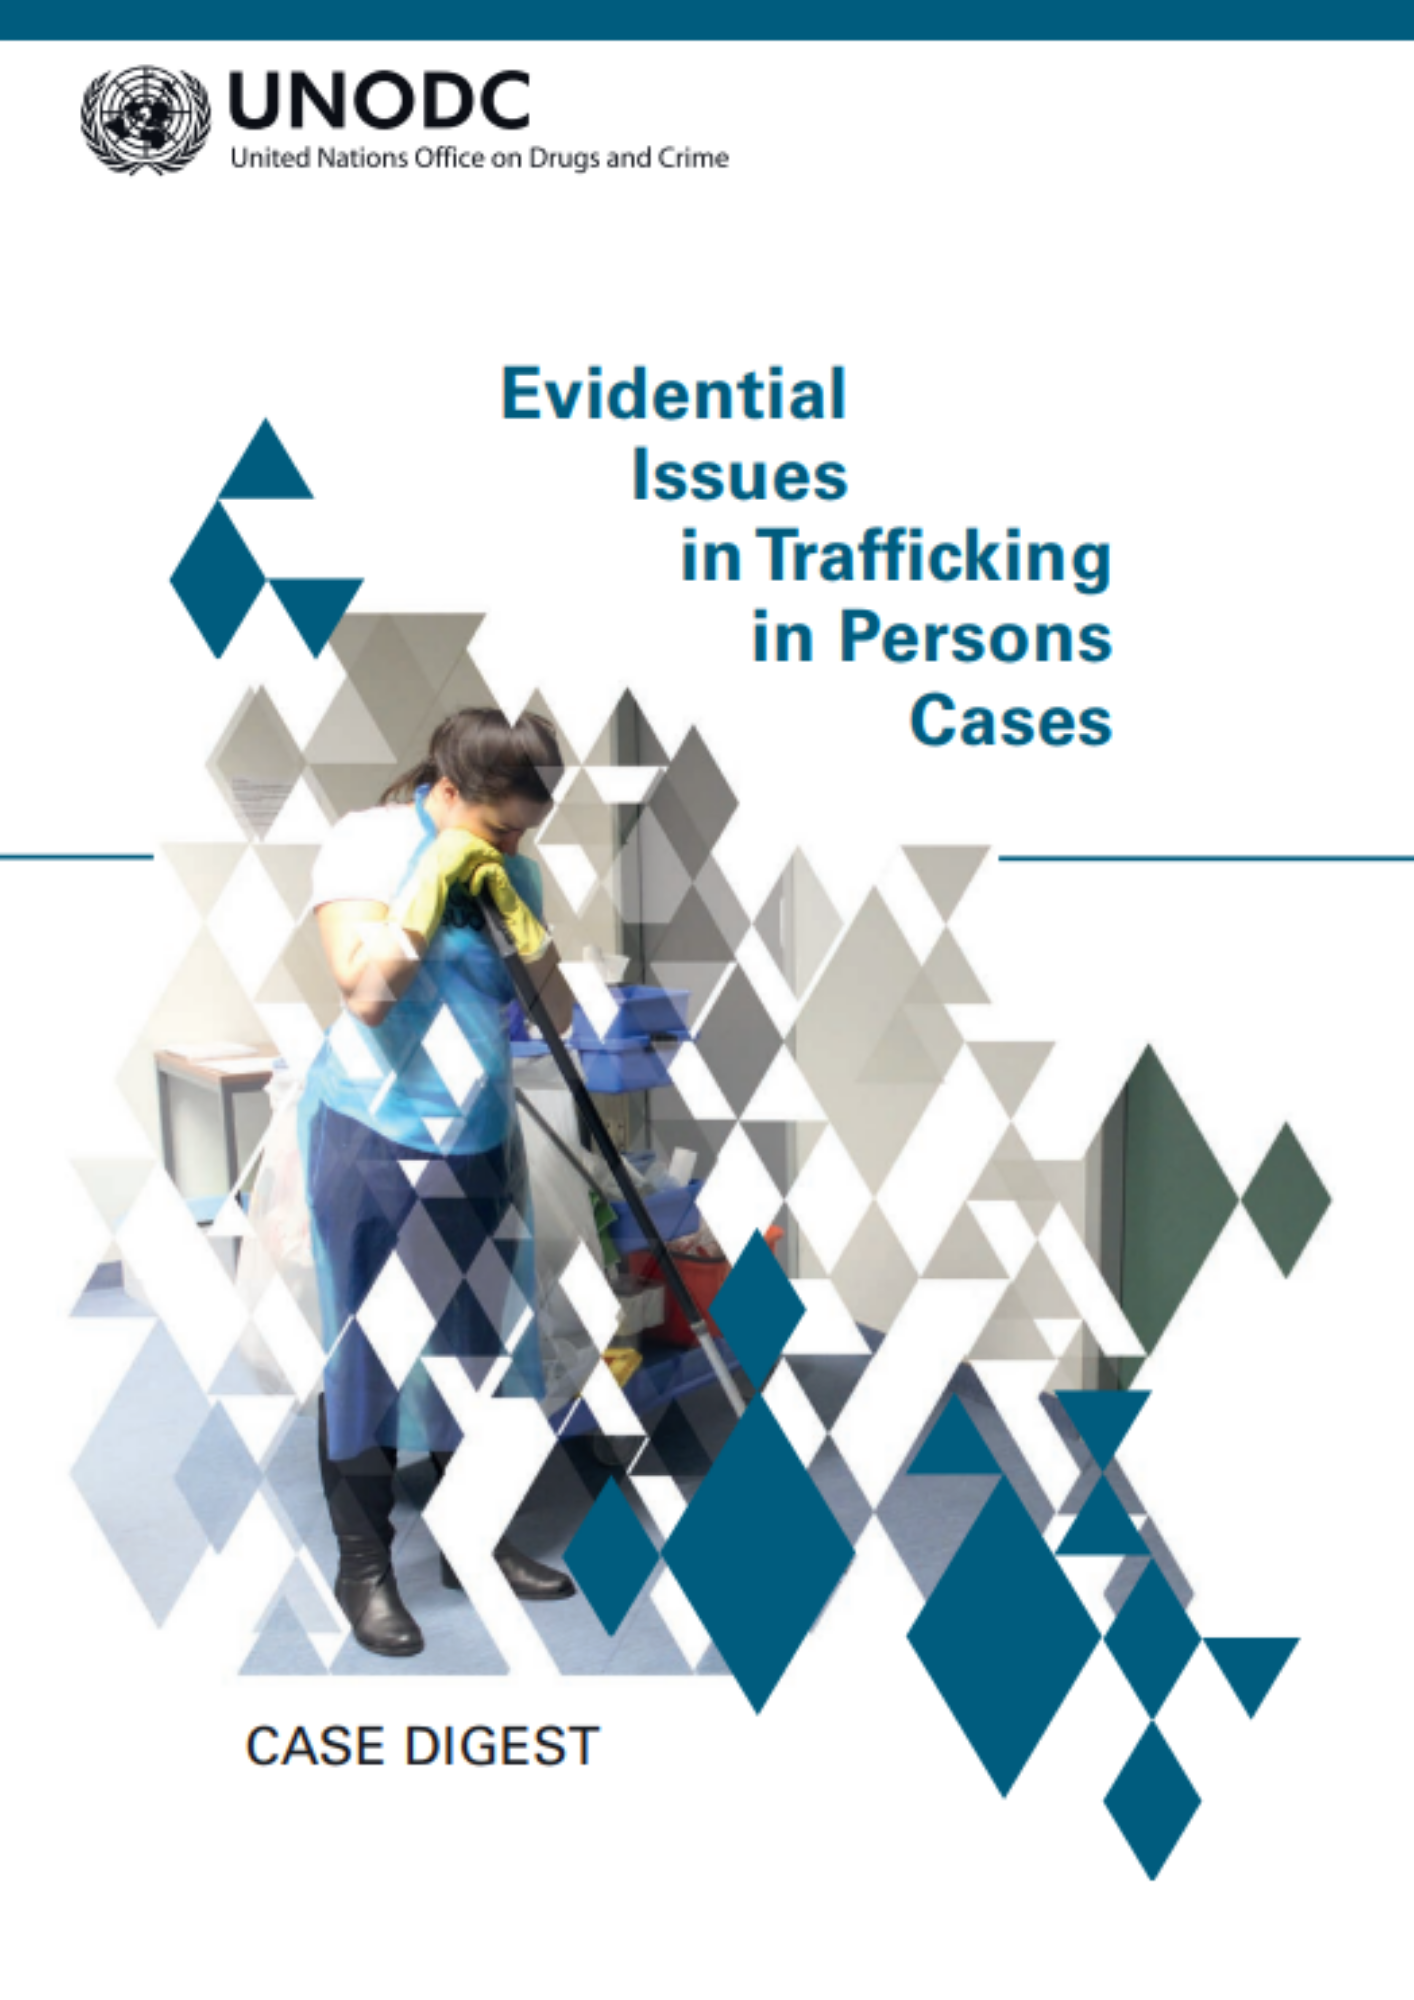 <div style="text-align: center;"> </div>
<div style="text-align: center;"><a href="https://www.unodc.org/documents/human-trafficking/2017/Case_Digest_Evidential_Issues_in_Trafficking.pdf">Evidential Issues in Trafficking in Persons Cases</a></div>